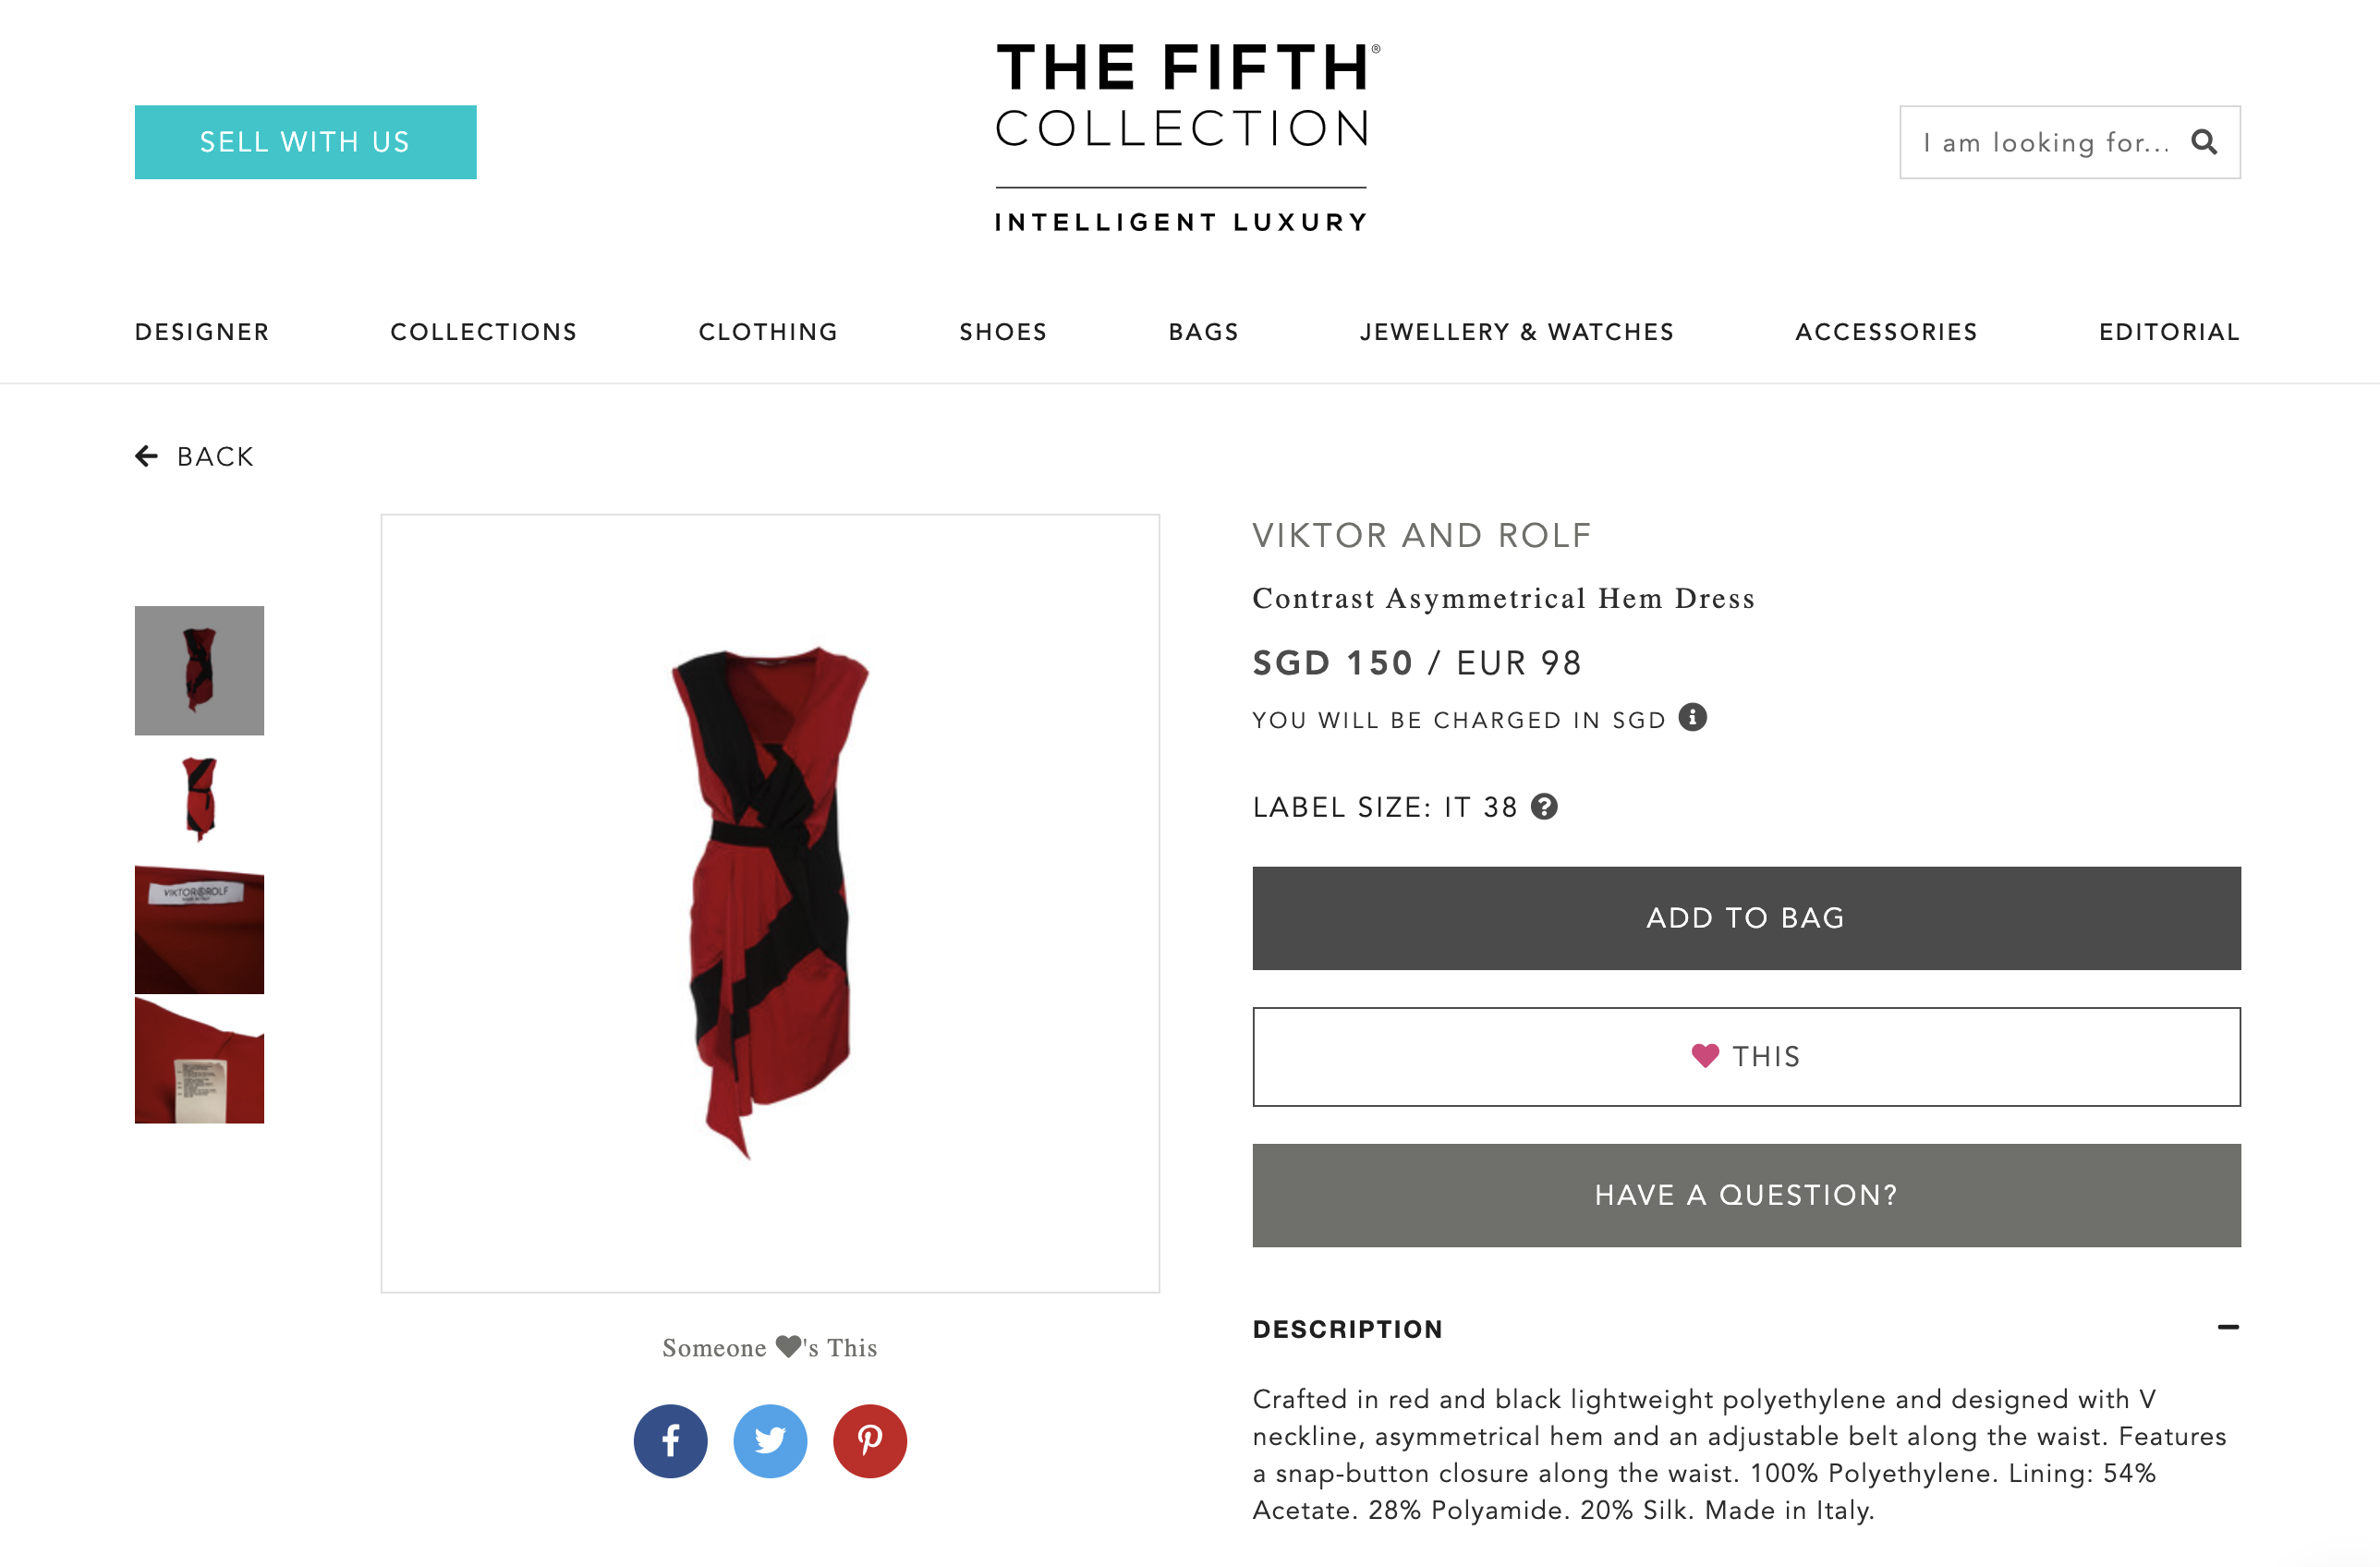 The Fifth Collection wishlist